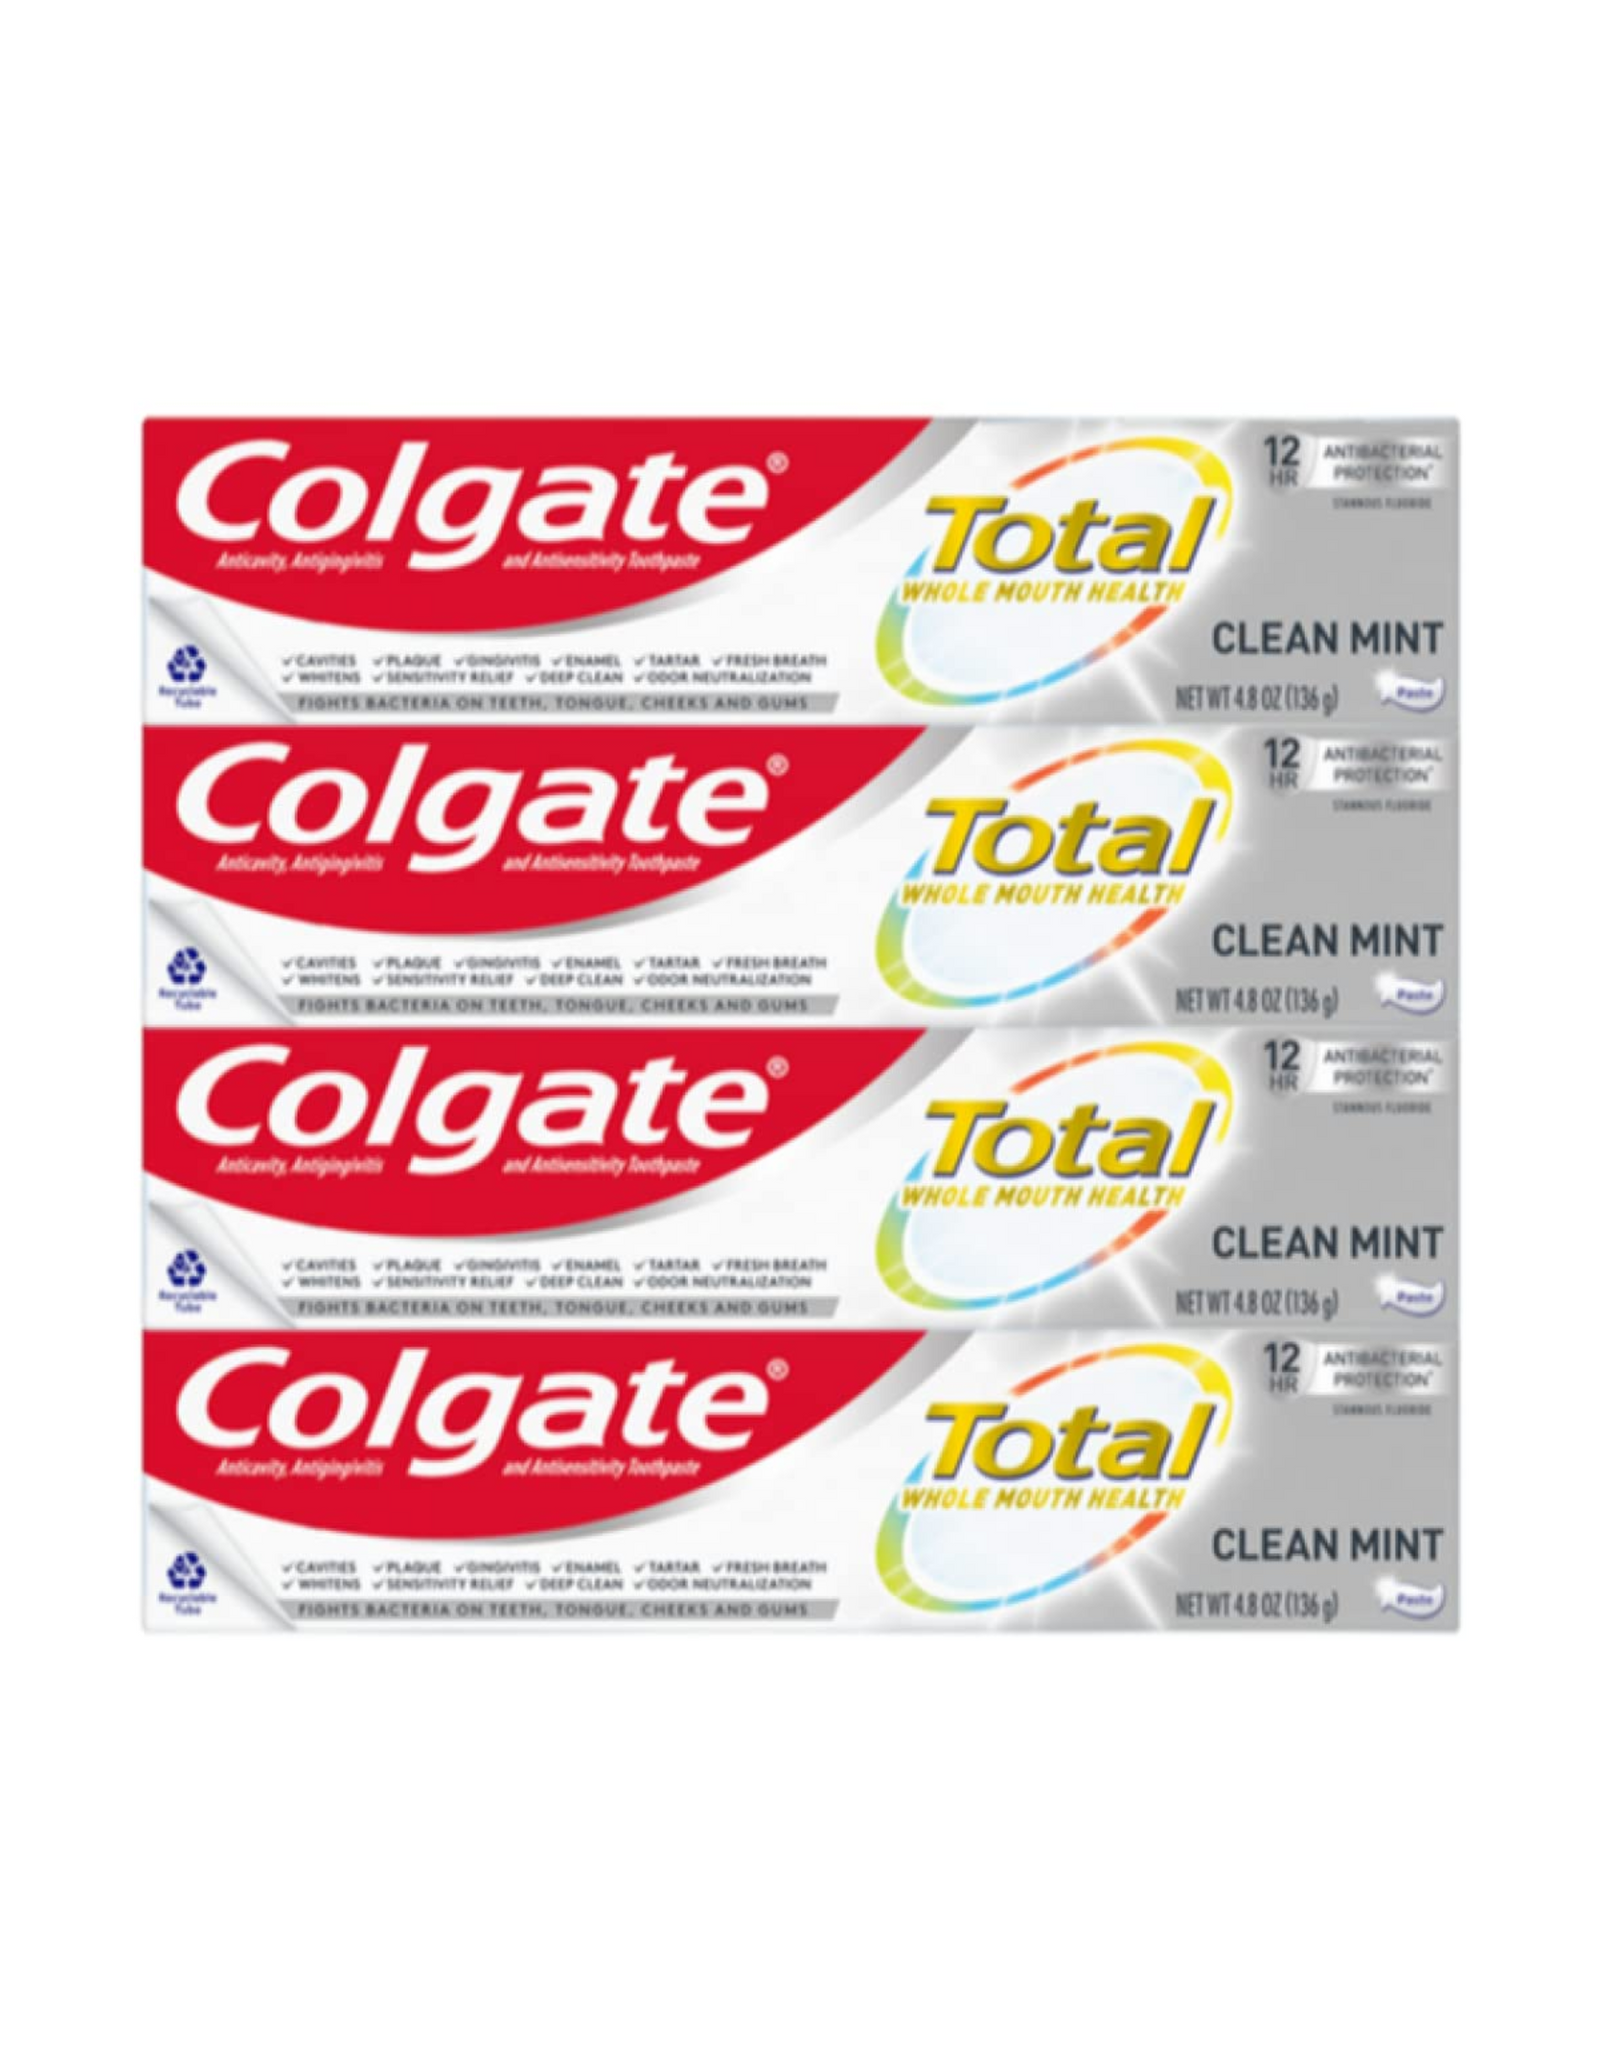 Colgate Total Toothpaste with Whitening, Antibacterial Protection, Clean Mint, 4.8 oz each (Pack of 4)